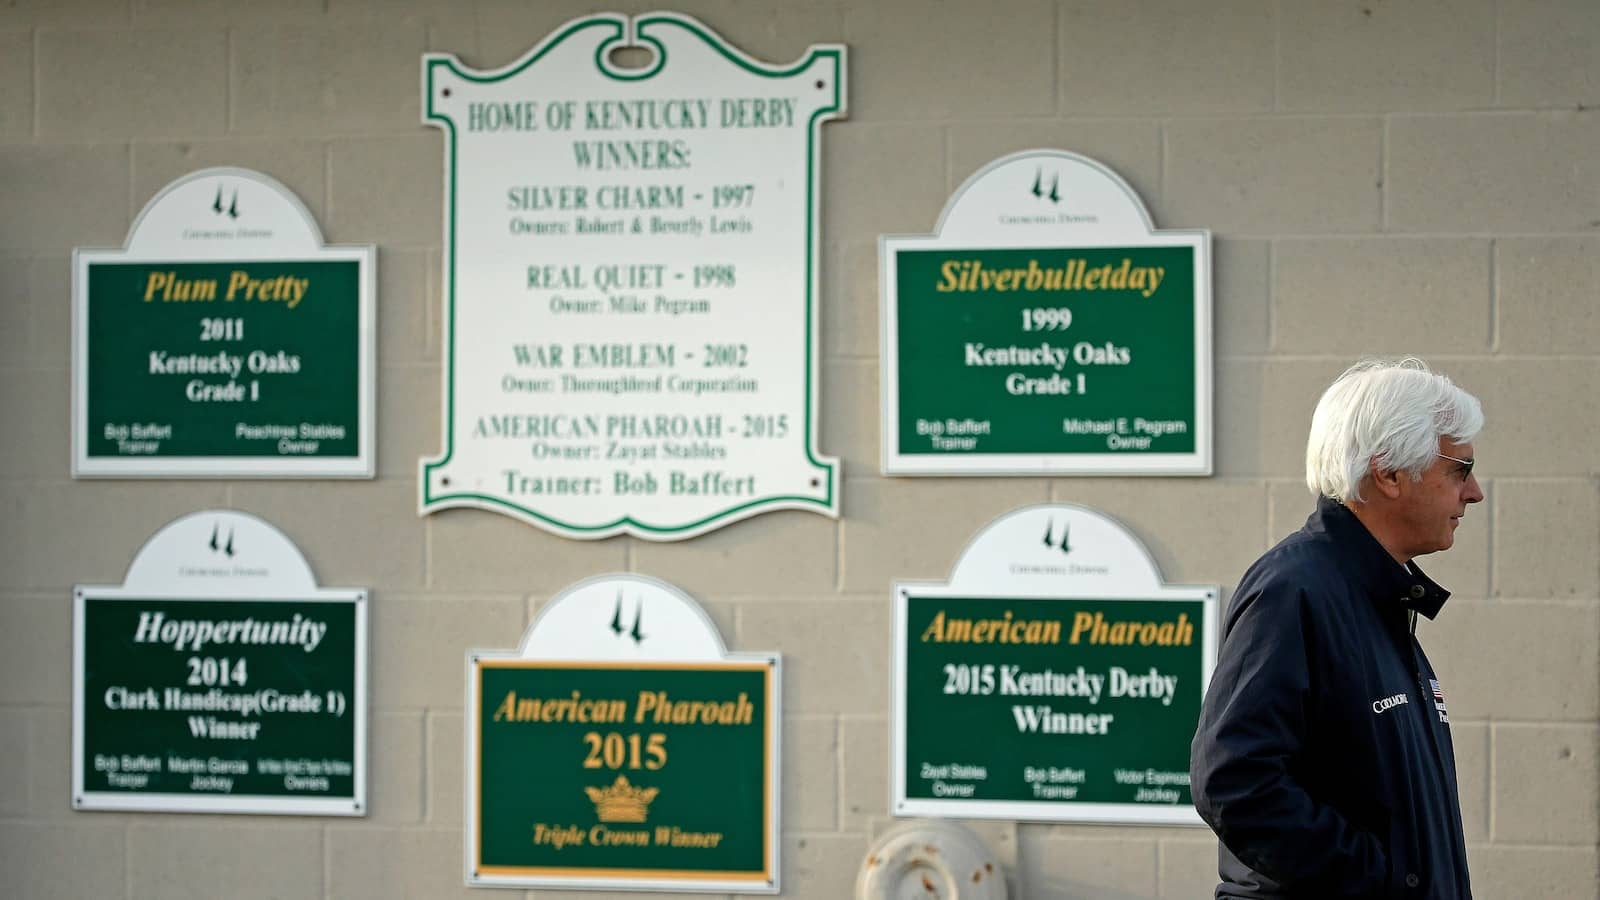 Horse racing’s household name will miss the 150th Kentucky Derby. Bob Baffert is exiled for 3rd year